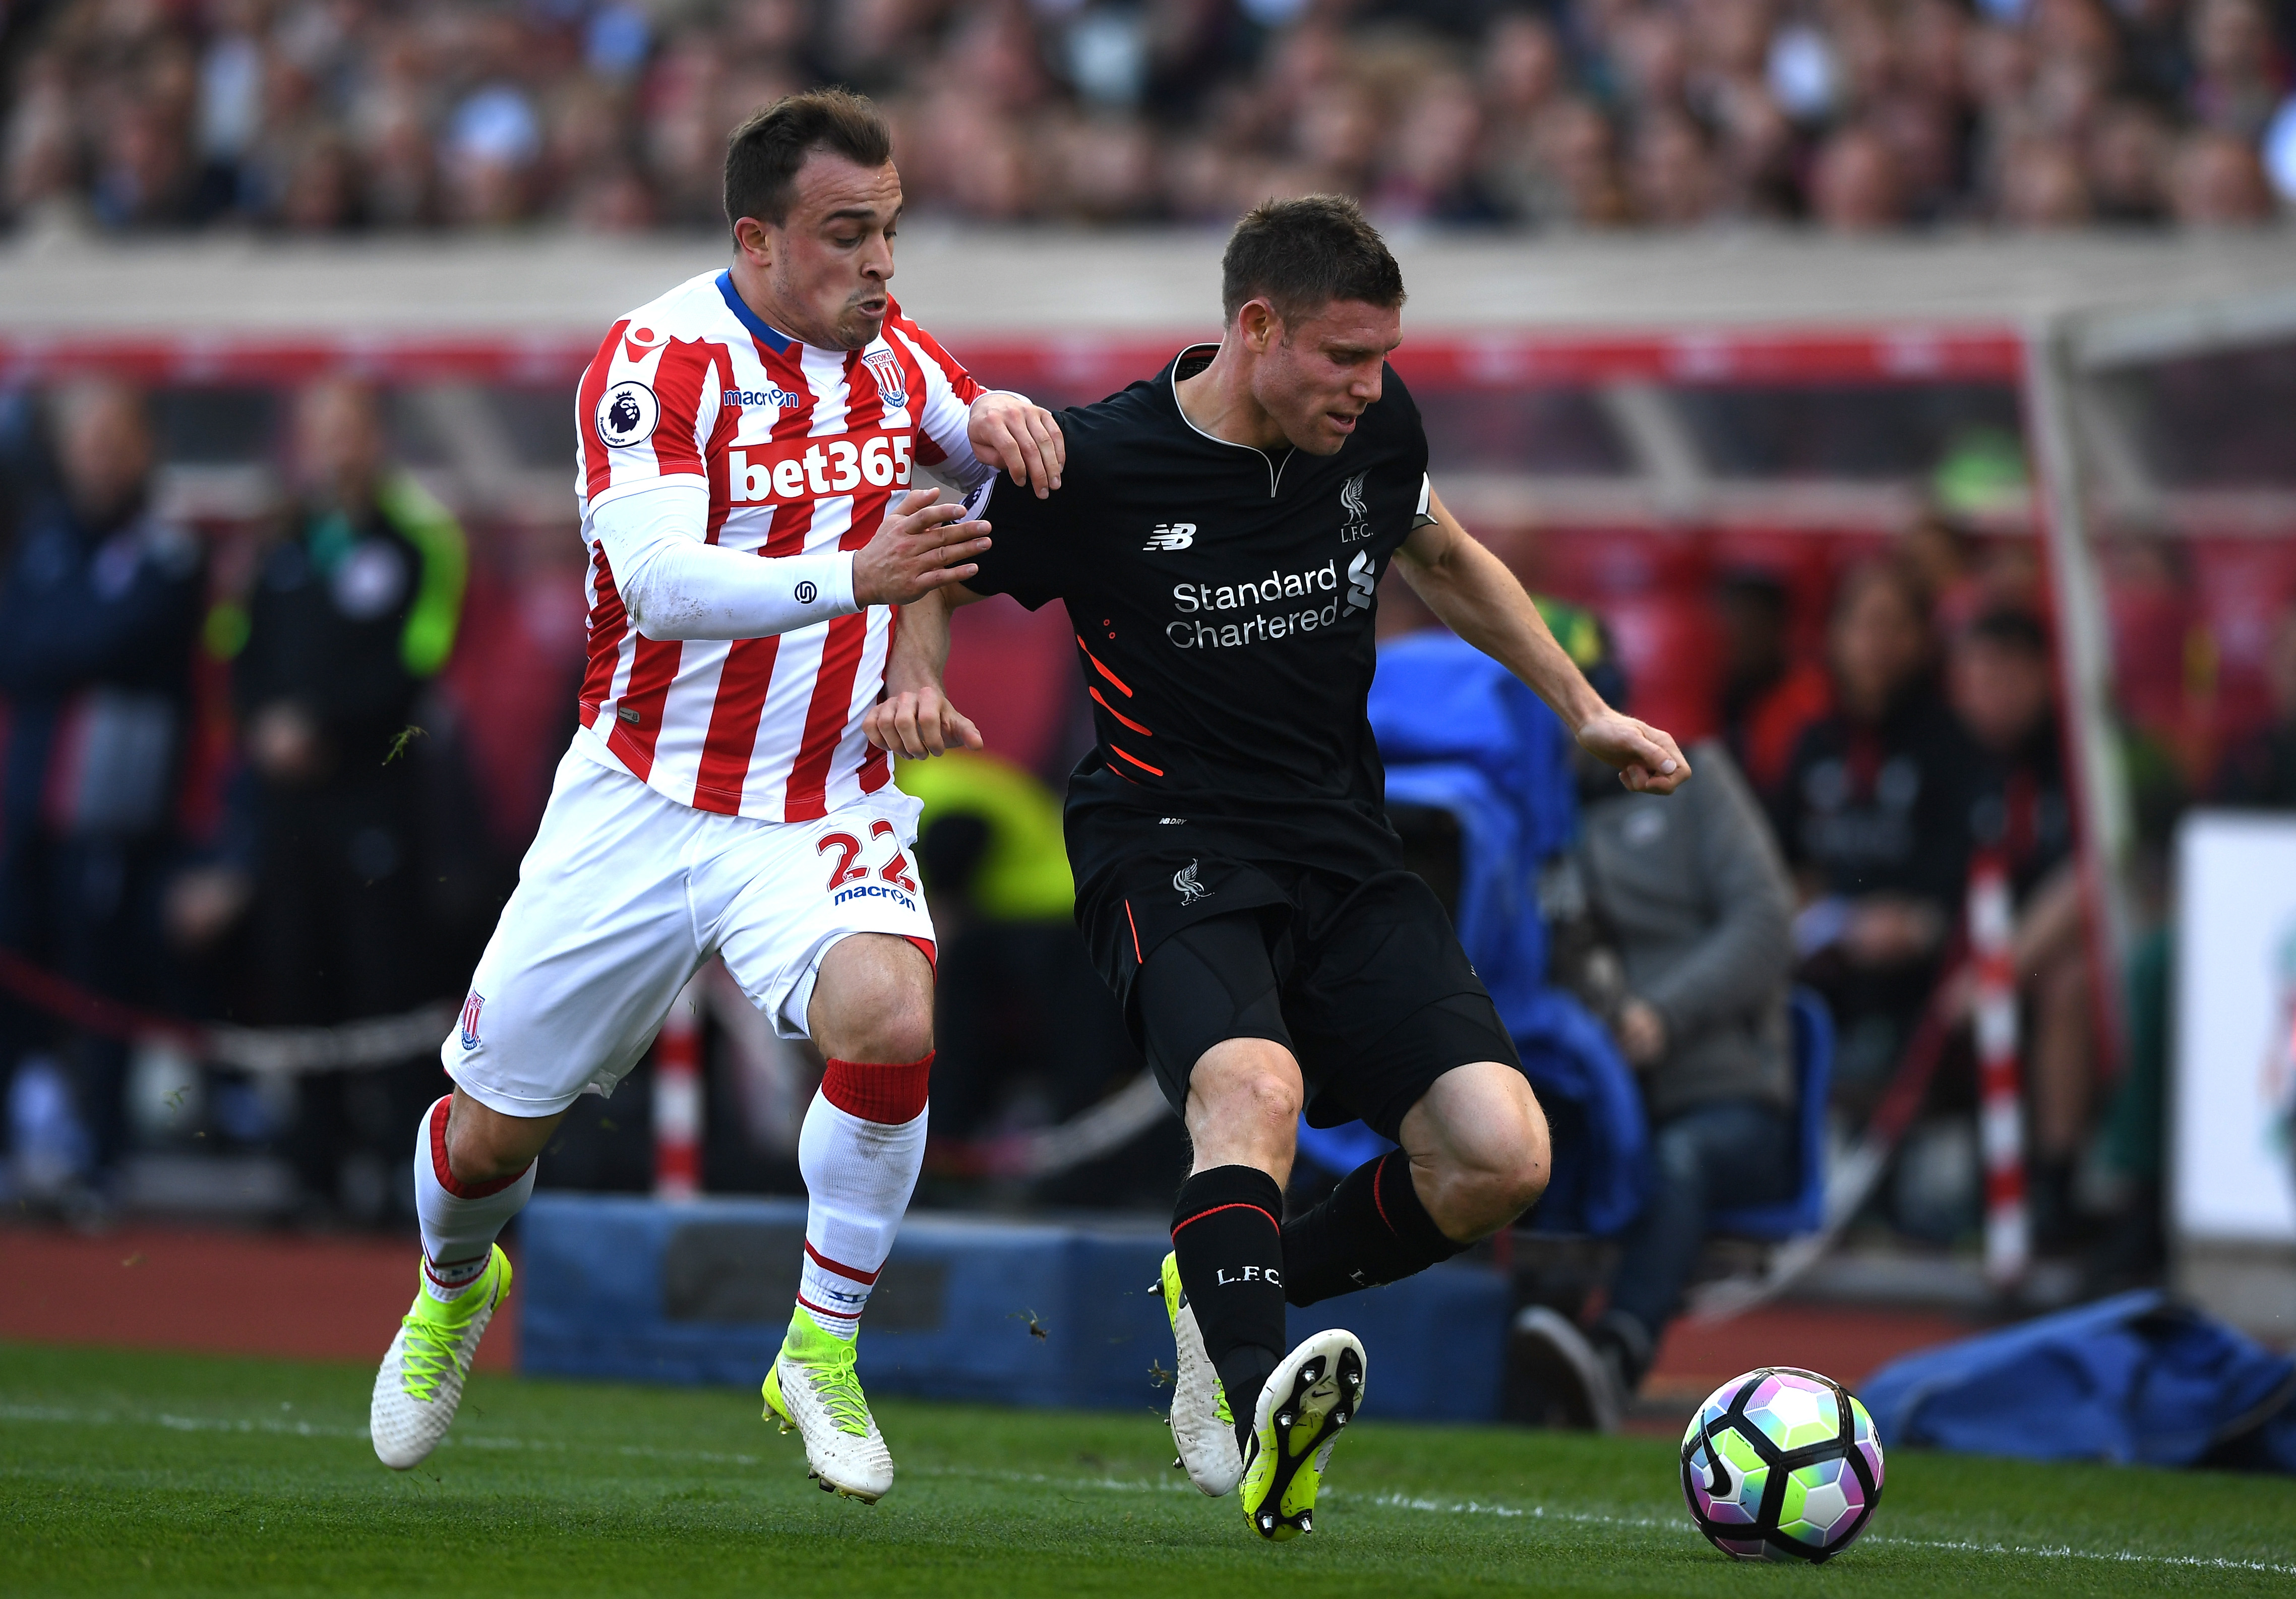 STOKE ON TRENT, ENGLAND - APRIL 08: Xherdan Shaqiri of Stoke City (L) and James Milner of Liverpool (R) battle for possession during the Premier League match between Stoke City and Liverpool at Bet365 Stadium on April 8, 2017 in Stoke on Trent, England.  (Photo by Gareth Copley/Getty Images)